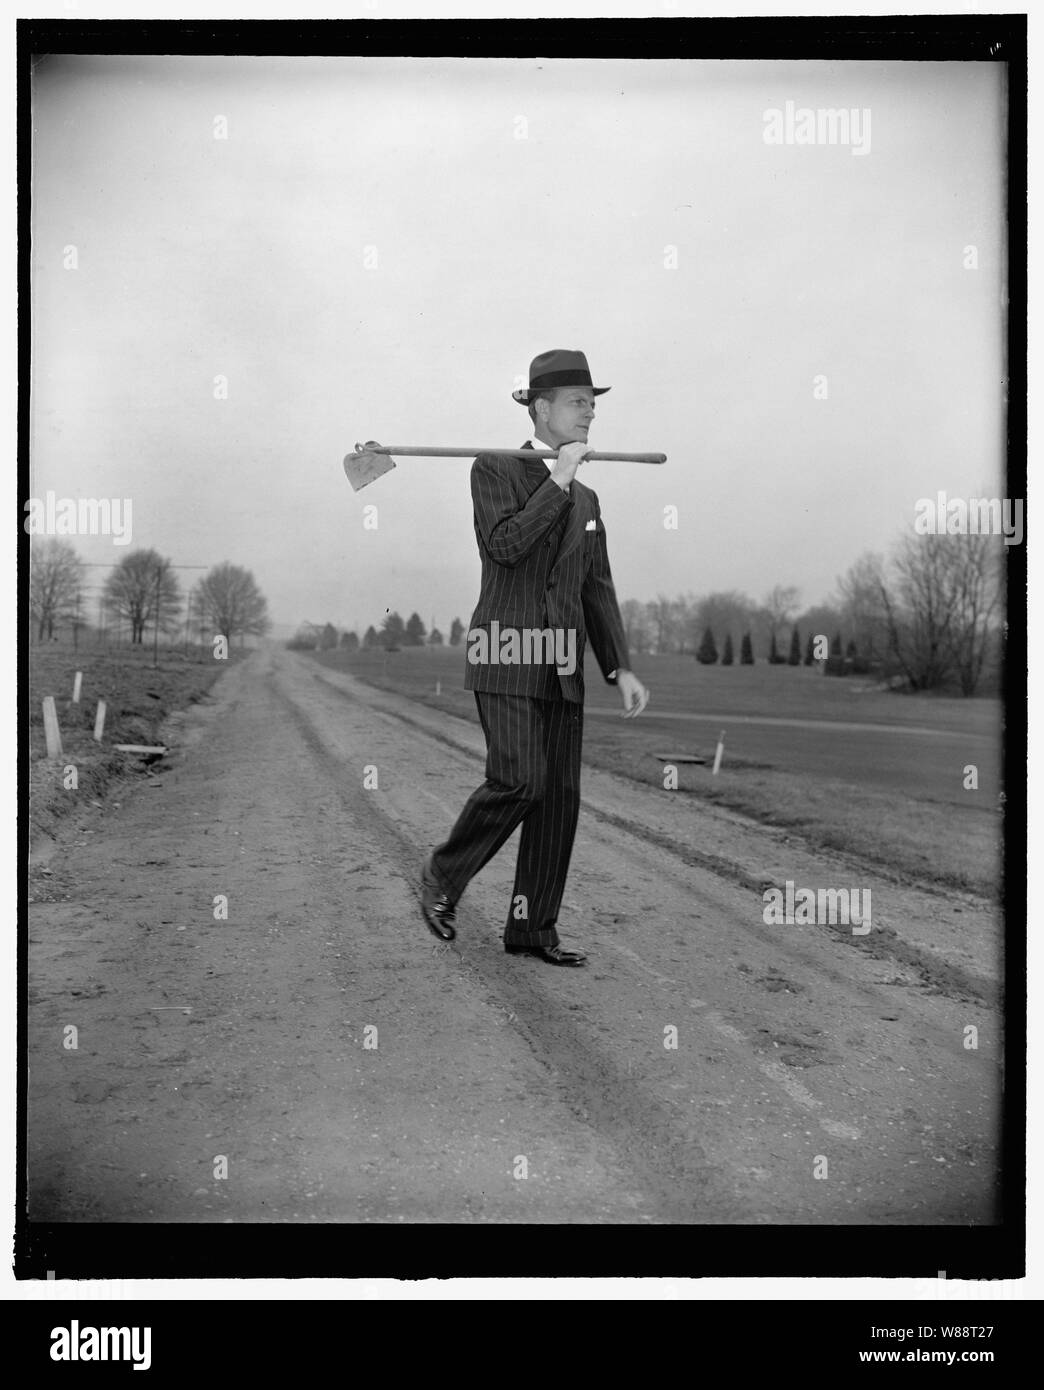 Man with the hoe, Rep. Newt Mills. Washington, D.C., Feb. 14. Rep. Newt V. Mills, of Louisiana, who was a cotton planter in his state before coming to Washington, obliged the photographer today by demonstrating how he looks at the end of a hard day of 'choppin cotton'. One must overlook the hat and business suit as the Congressman didn't bring his working clothes to Congress, 2-14-39 Stock Photo